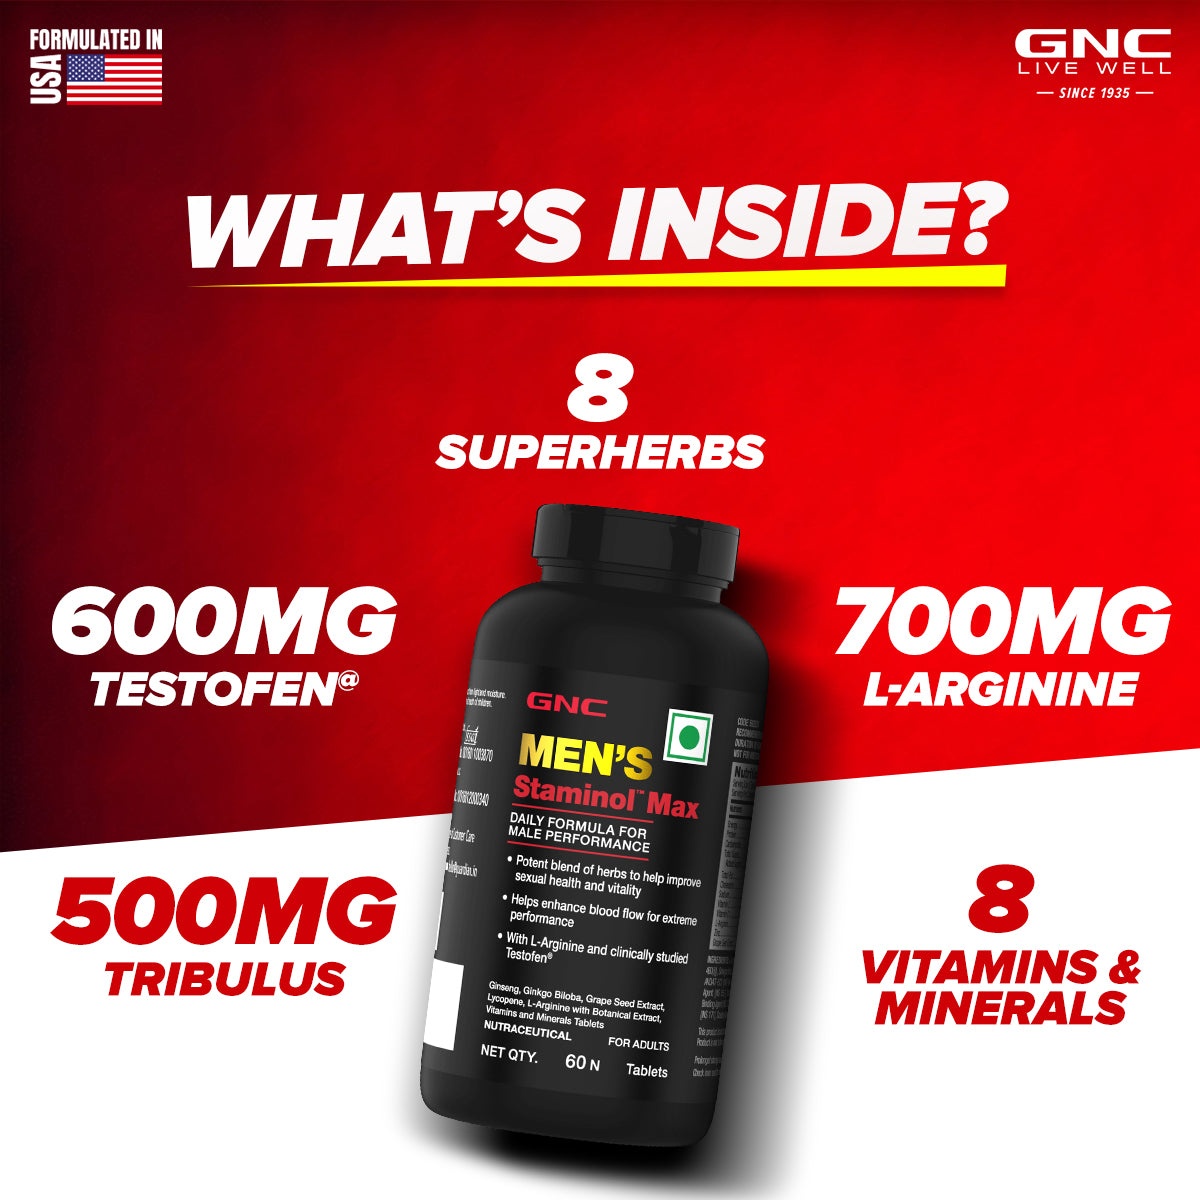 GNC Men's Staminol Max - Testosterone Booster for Long-Lasting Performance & Stamina - Free Fish Oil 1000mg